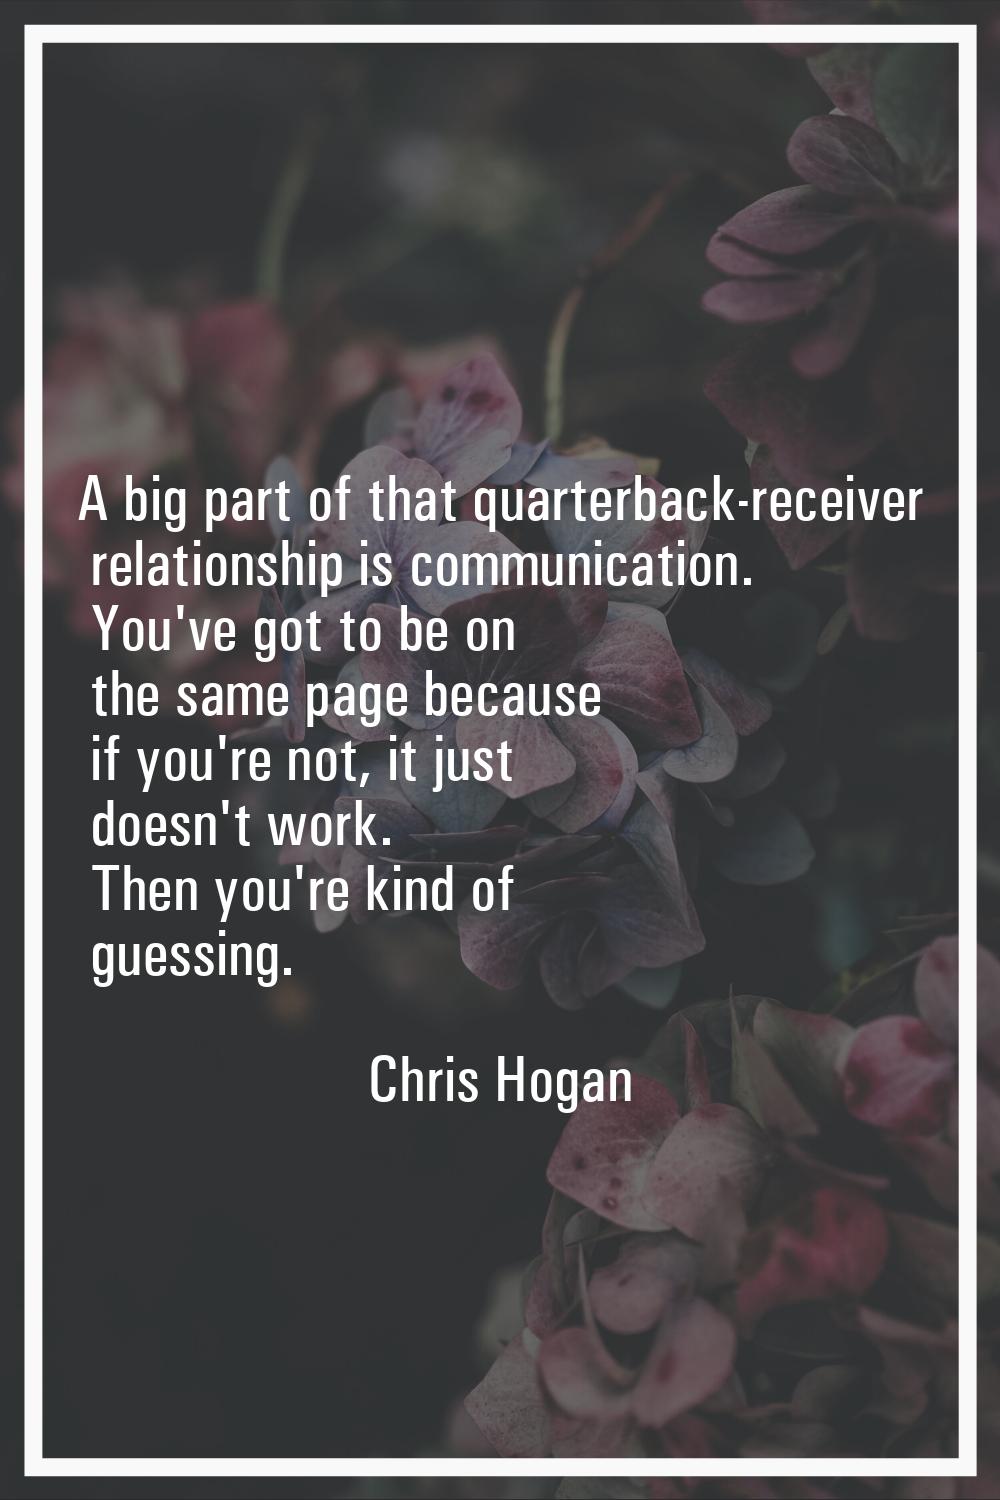 A big part of that quarterback-receiver relationship is communication. You've got to be on the same